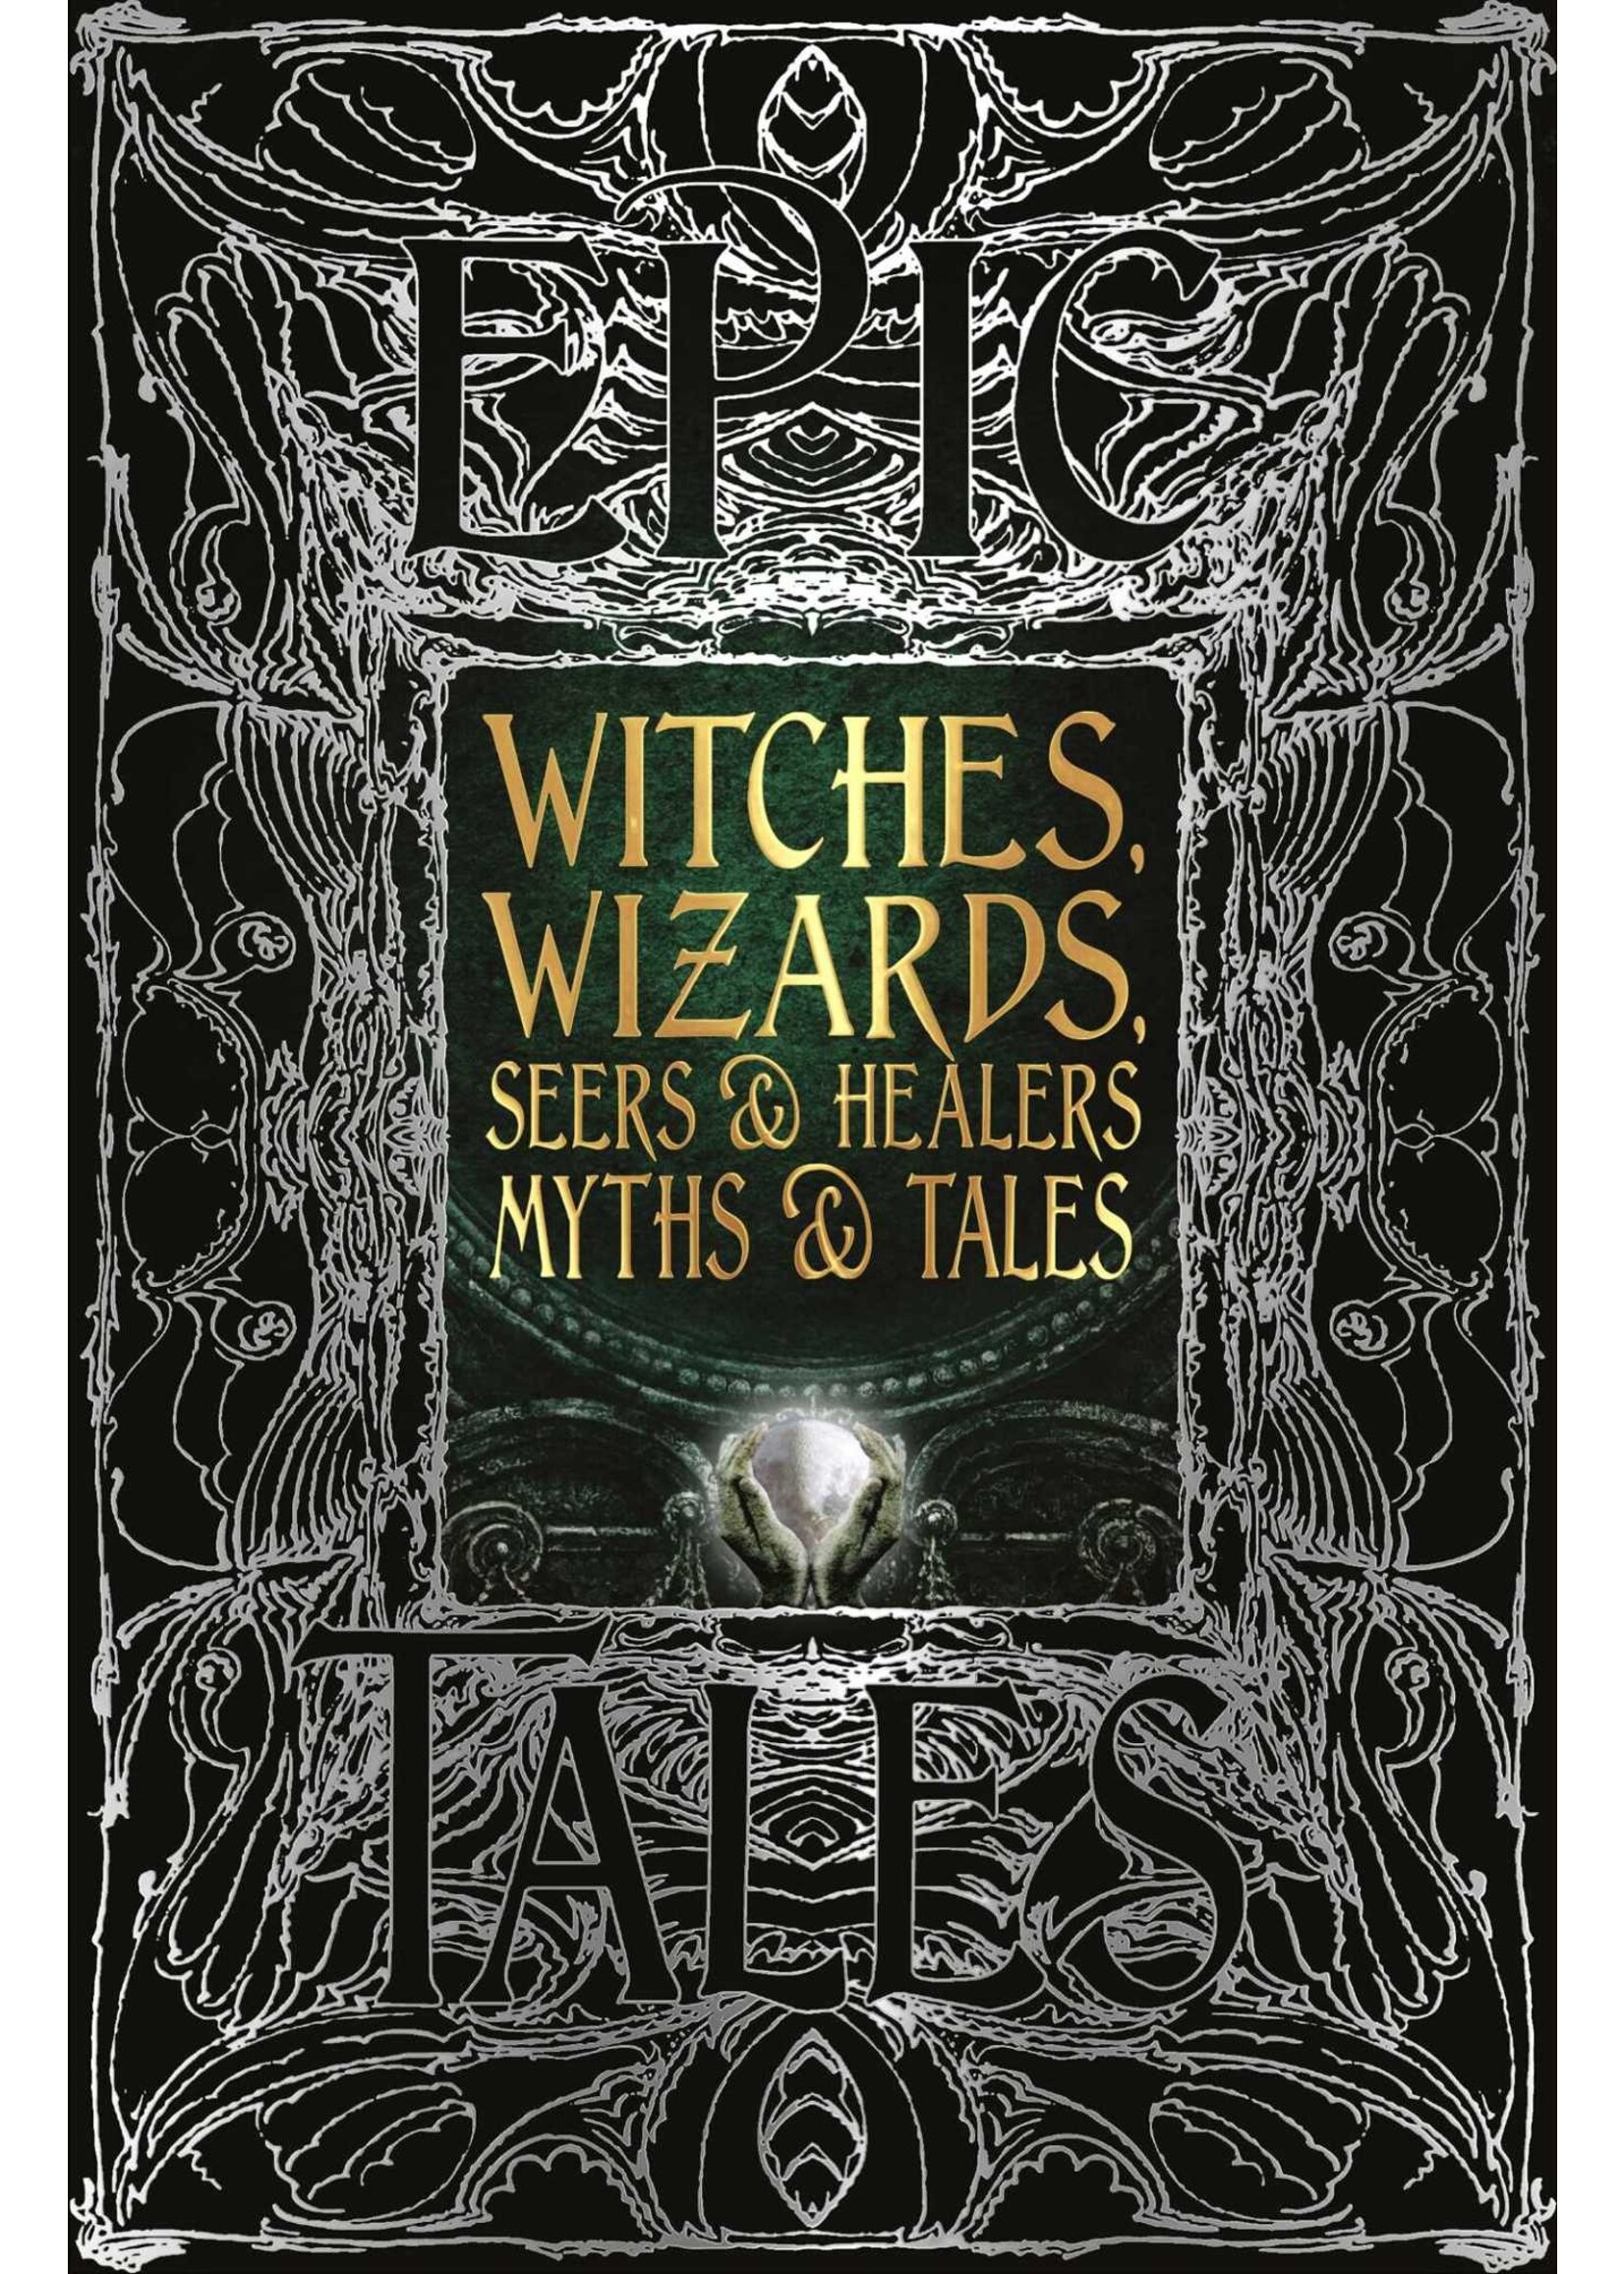 Witches, Wizards, Seers Healers Myths Tales: Epic Tales by Flame Tree Studio